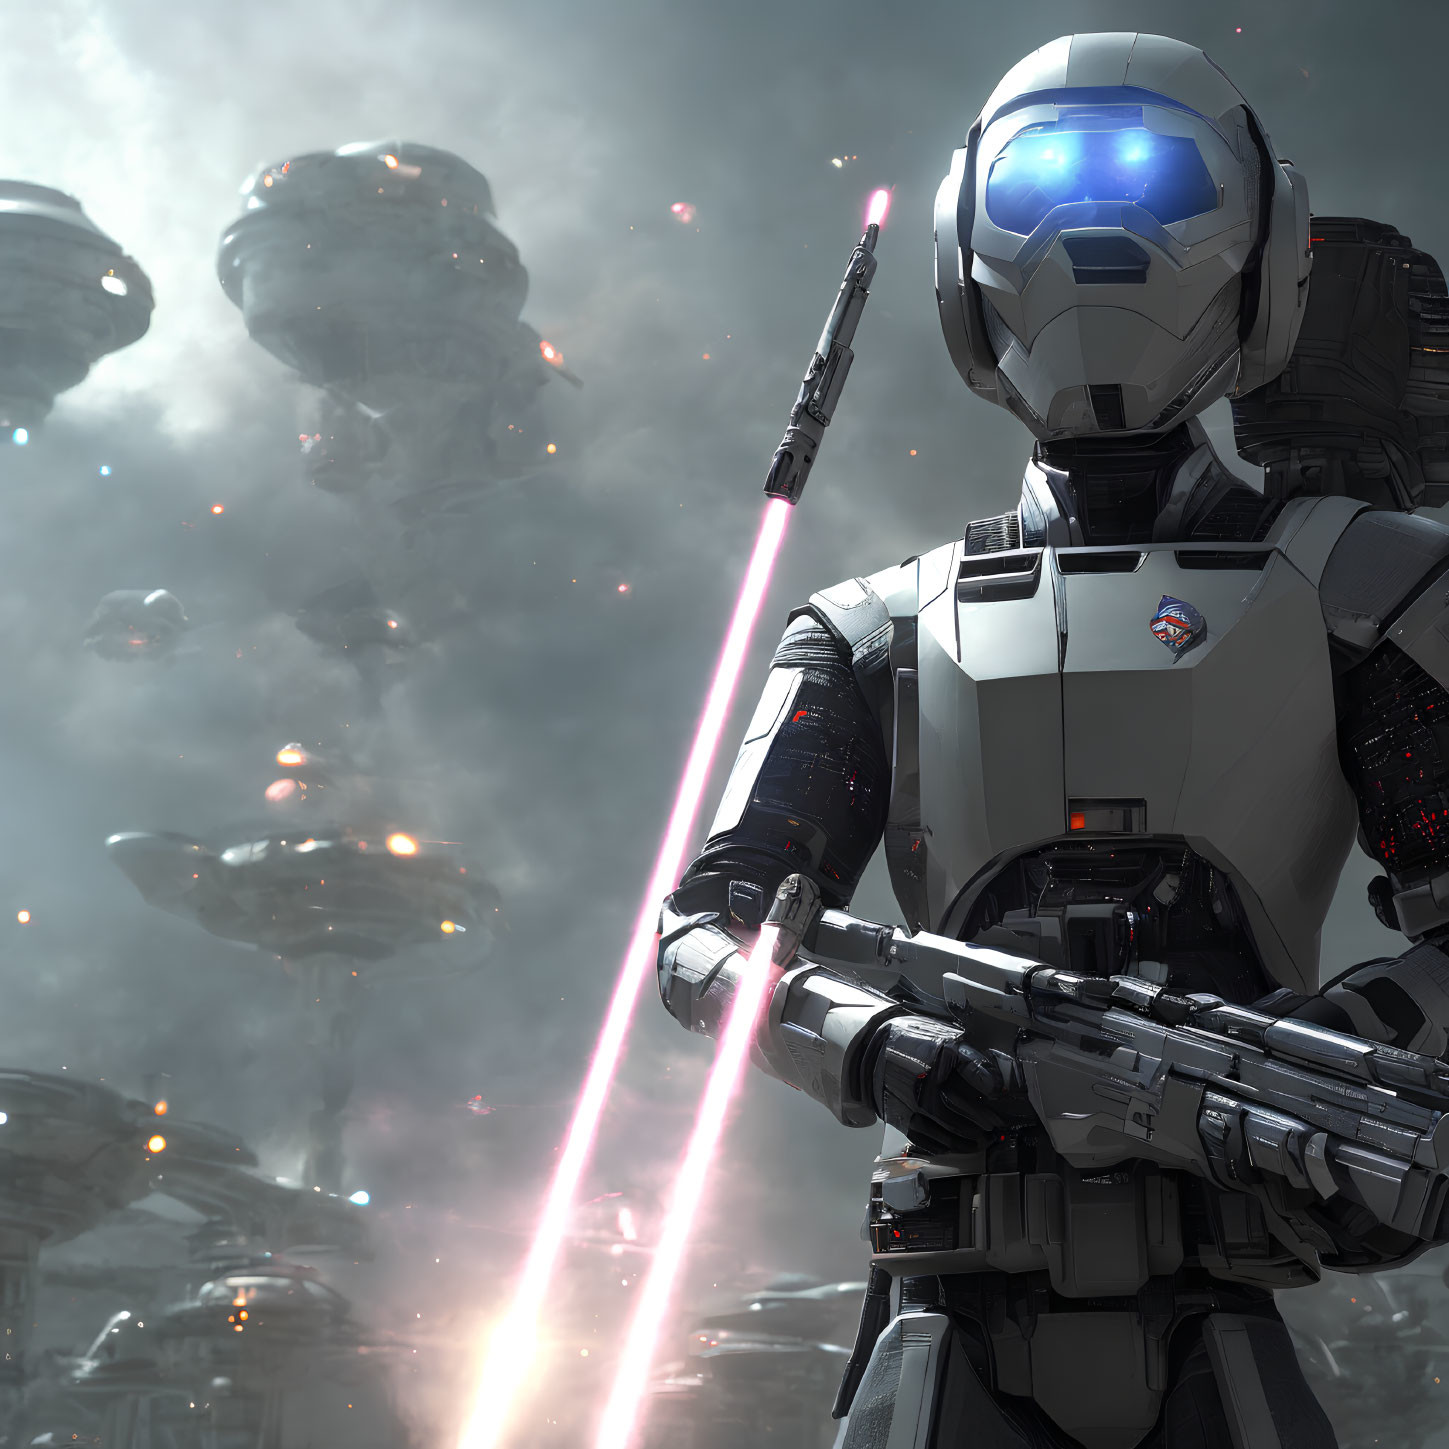 Futuristic robot soldier with glowing blue visor and red beam rifle in sci-fi setting